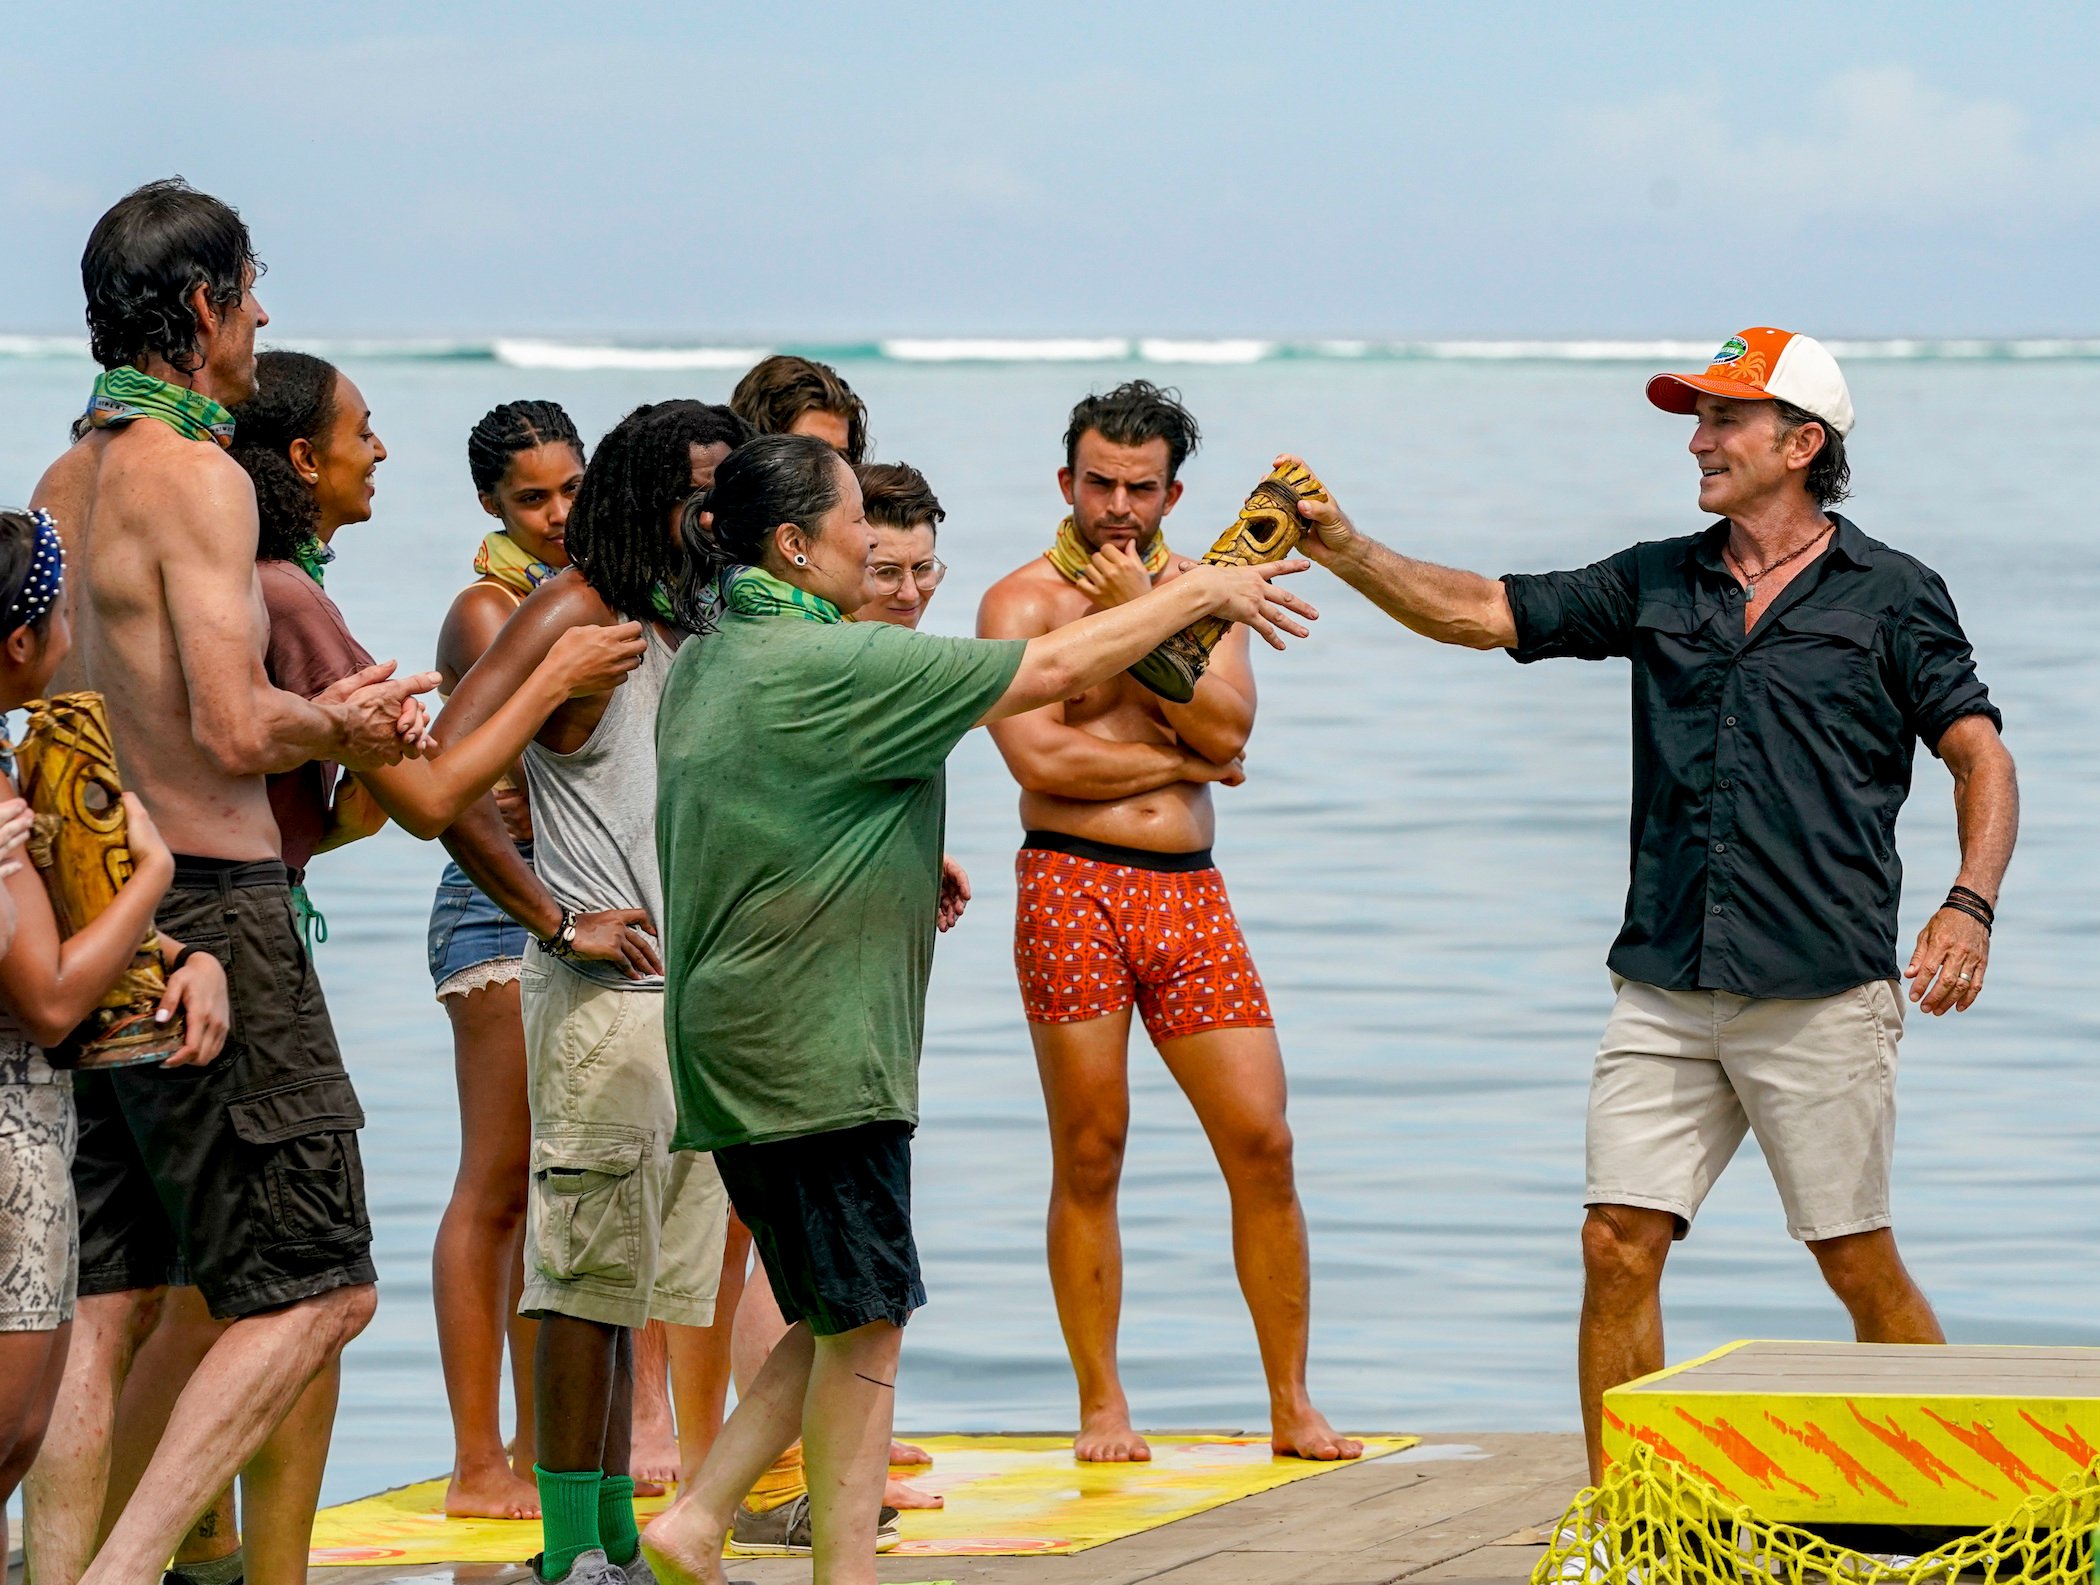 'Survivor' Season 41 spoilers: Jeff Probst awards Genie Chen and her Tribe with the Immunity Idol after a daily challenge while on the beach